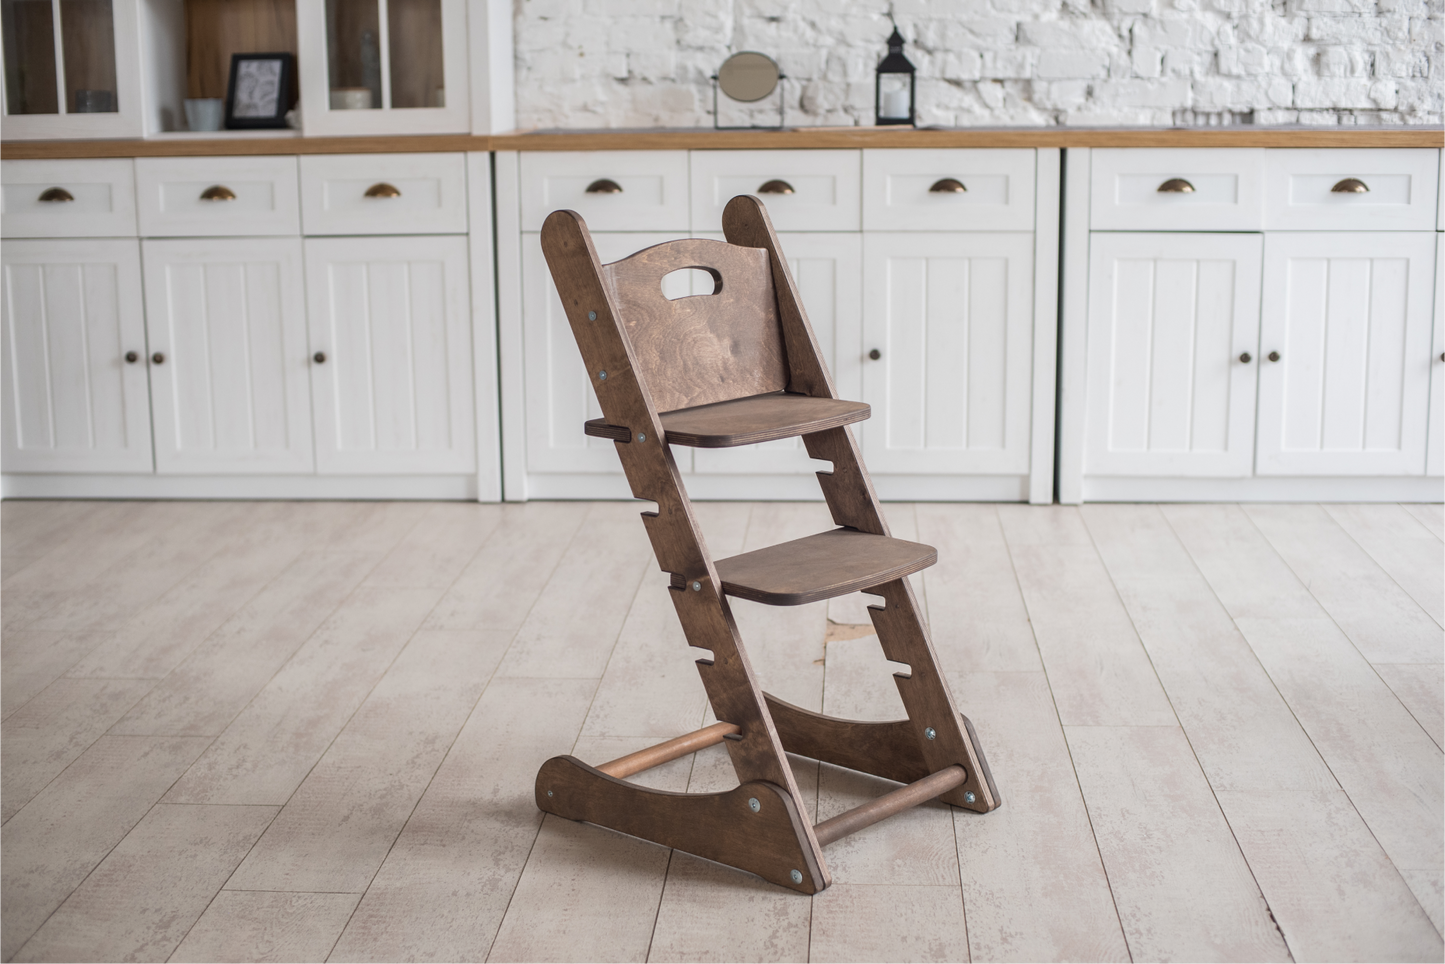 Growing Chair for Babies – Kitchen Helper Tower - Chocolate